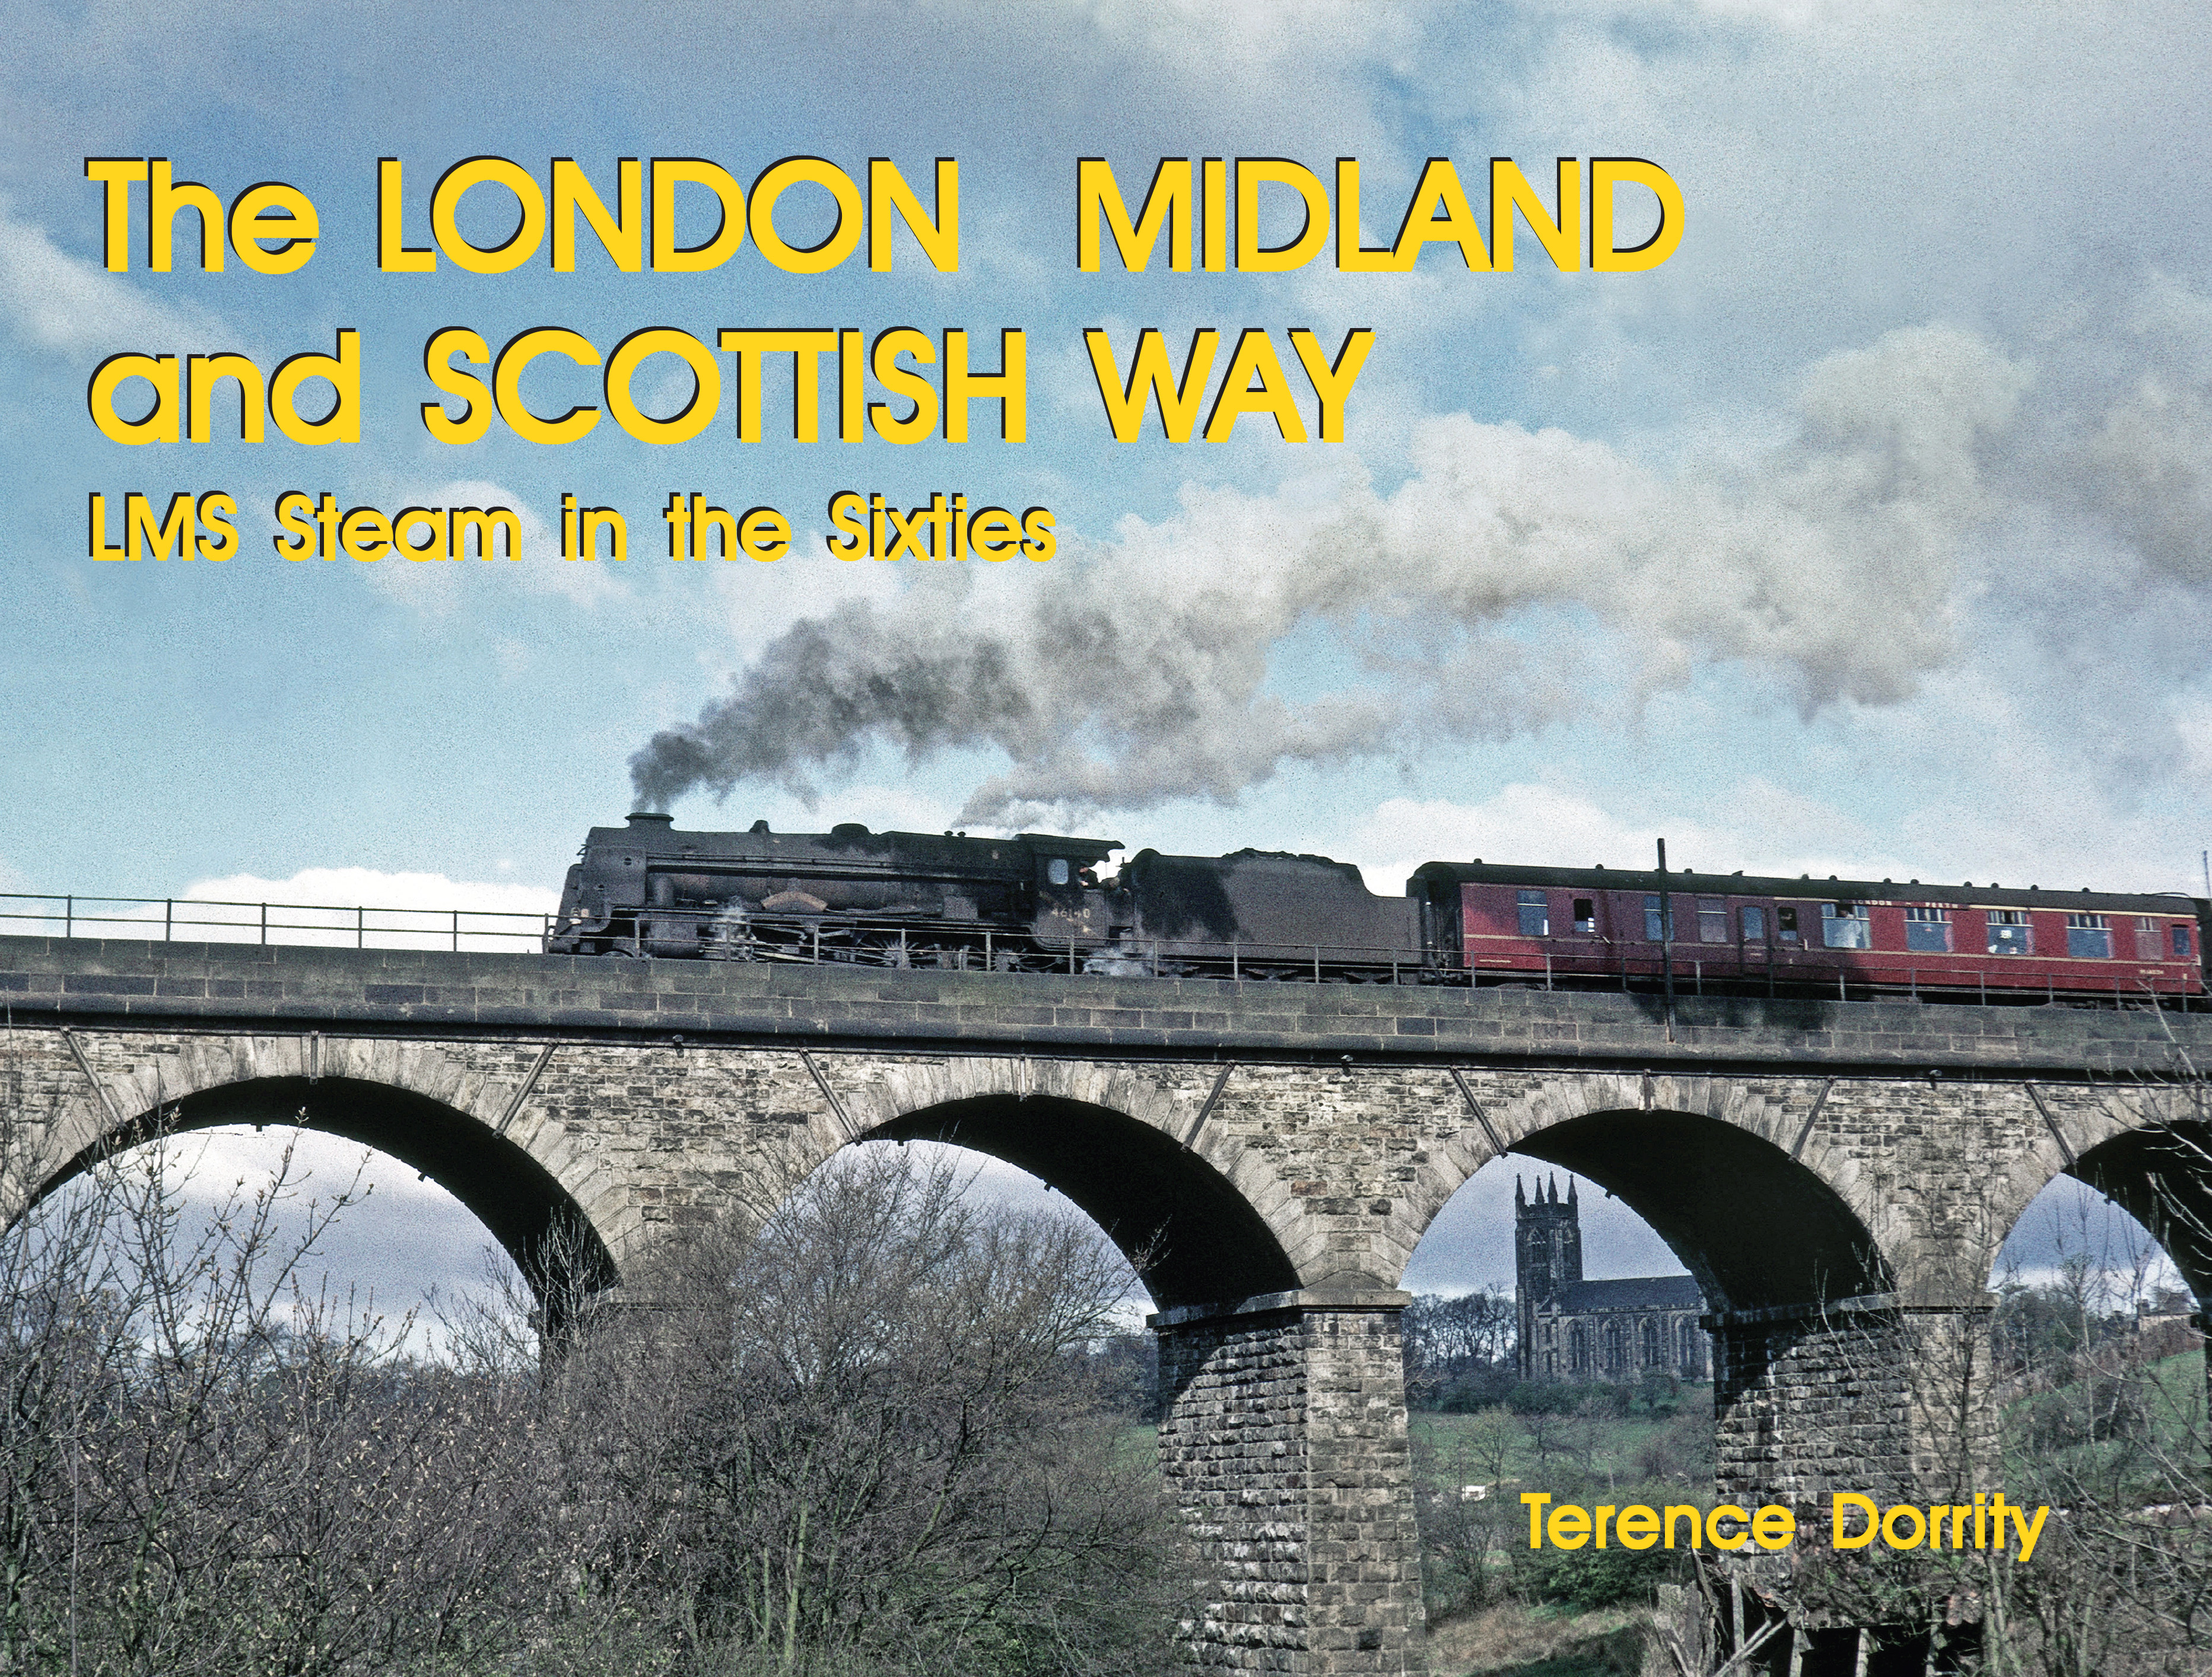 London Midland and Scottish Way - LMS Steam in the Sixties